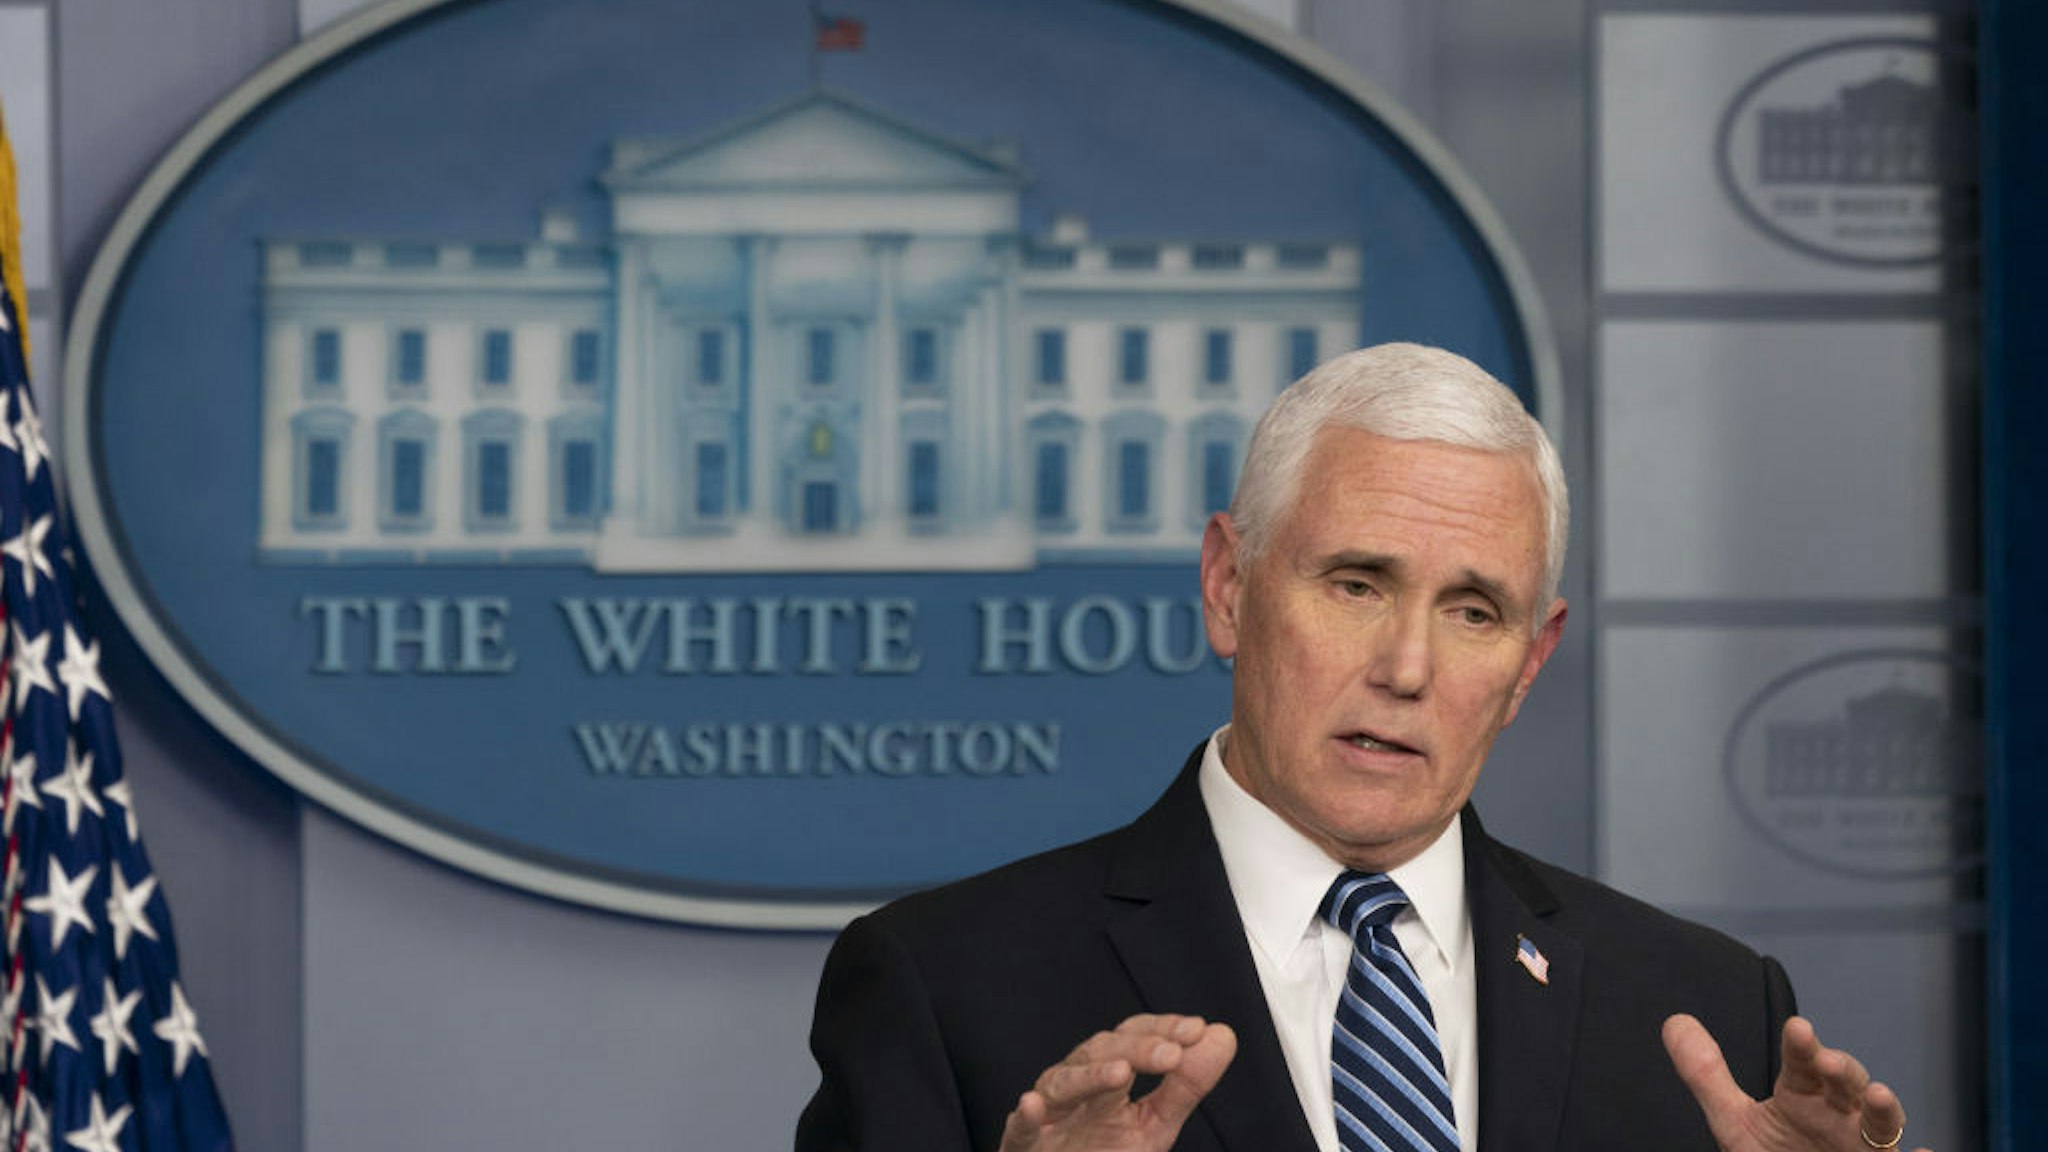 U.S. Vice President Mike Pence speaks during a news conference in the White House in Washington, D.C., U.S., on Friday, April 24, 2020.